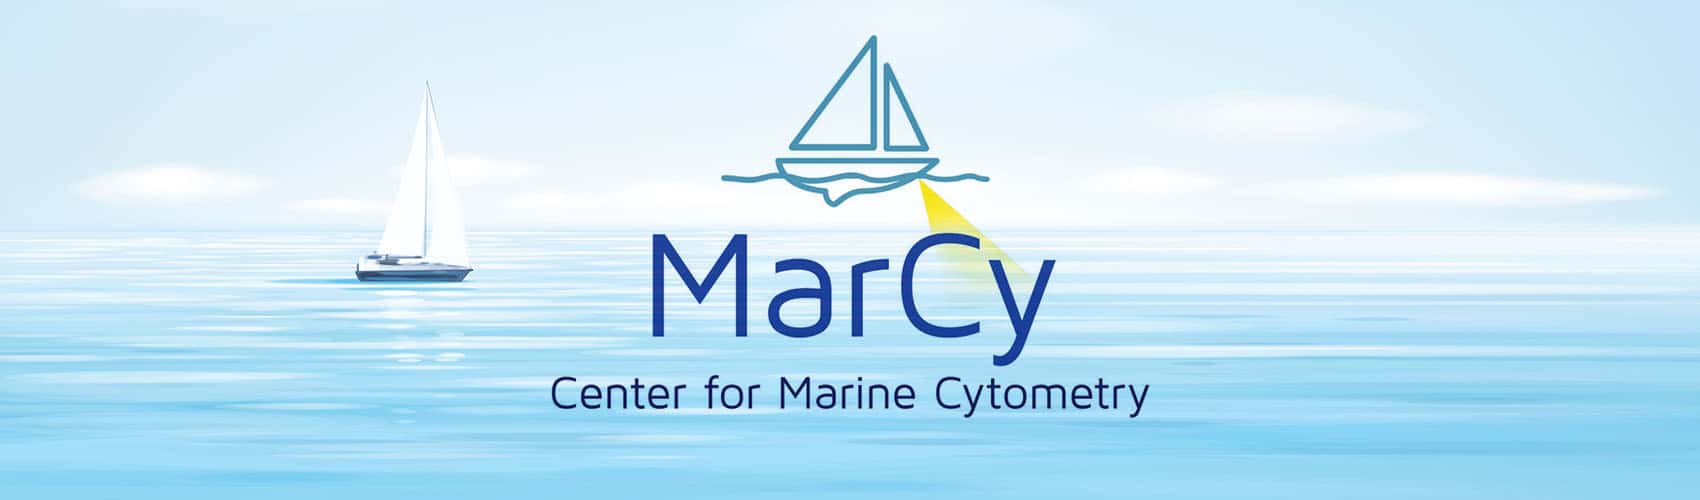 MarCy logo with sailboat